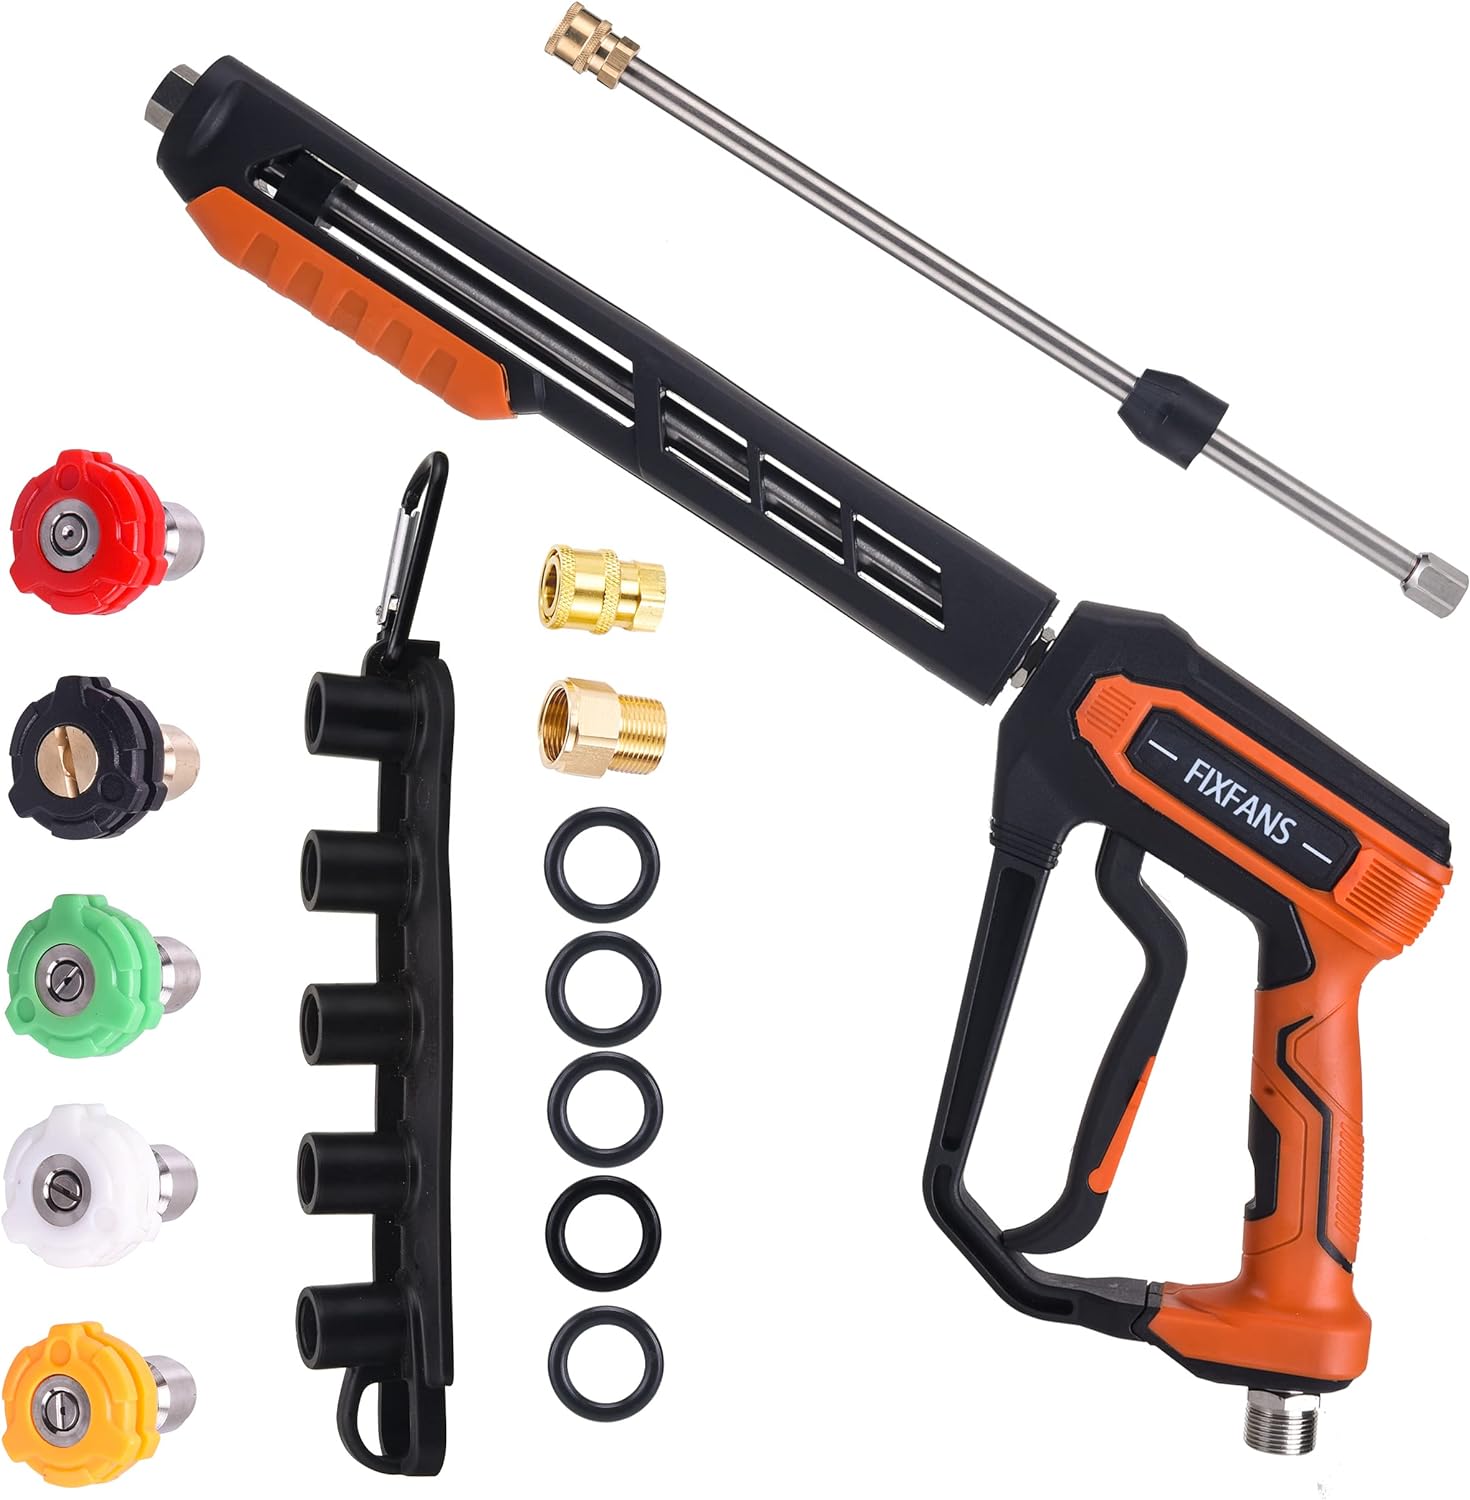 Pressure Washer Gun Kit, 4000PSI Power Washer Handle Gun with Replacement Wand Extension, High Pressure Spray Gun with 5 Nozzle Tips, M22 Fitting, 1/4 Quick Connect Female, Stainless Steel